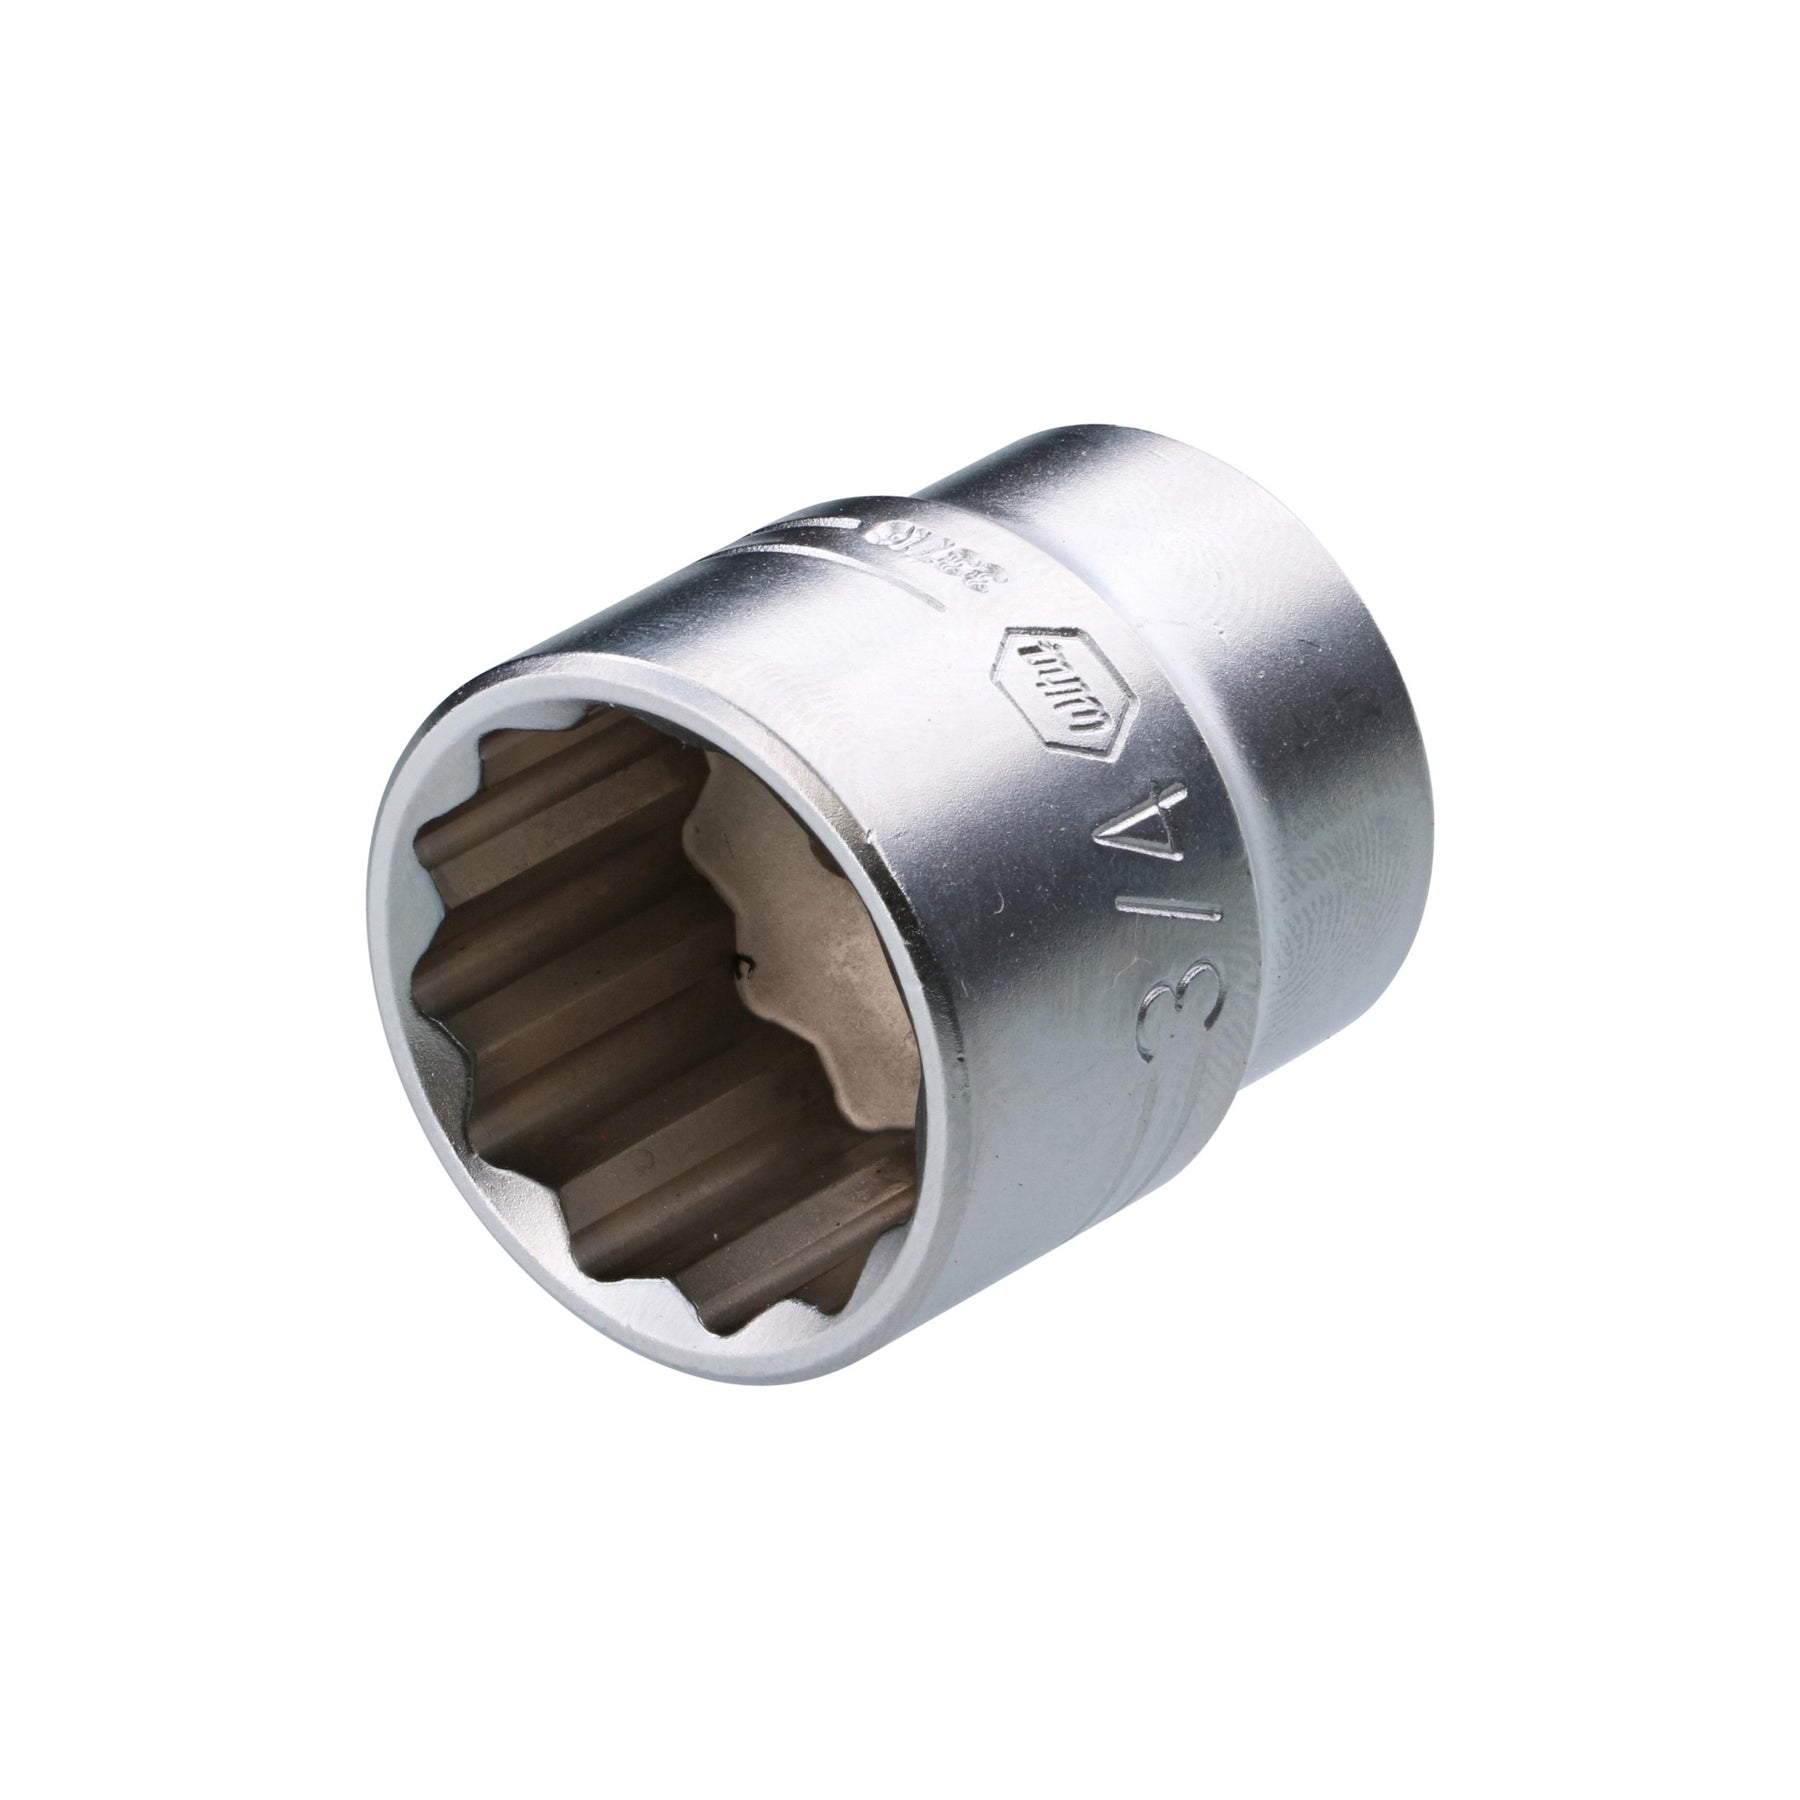 12 Point - 3/8 Inch Drive Socket - 3/4"